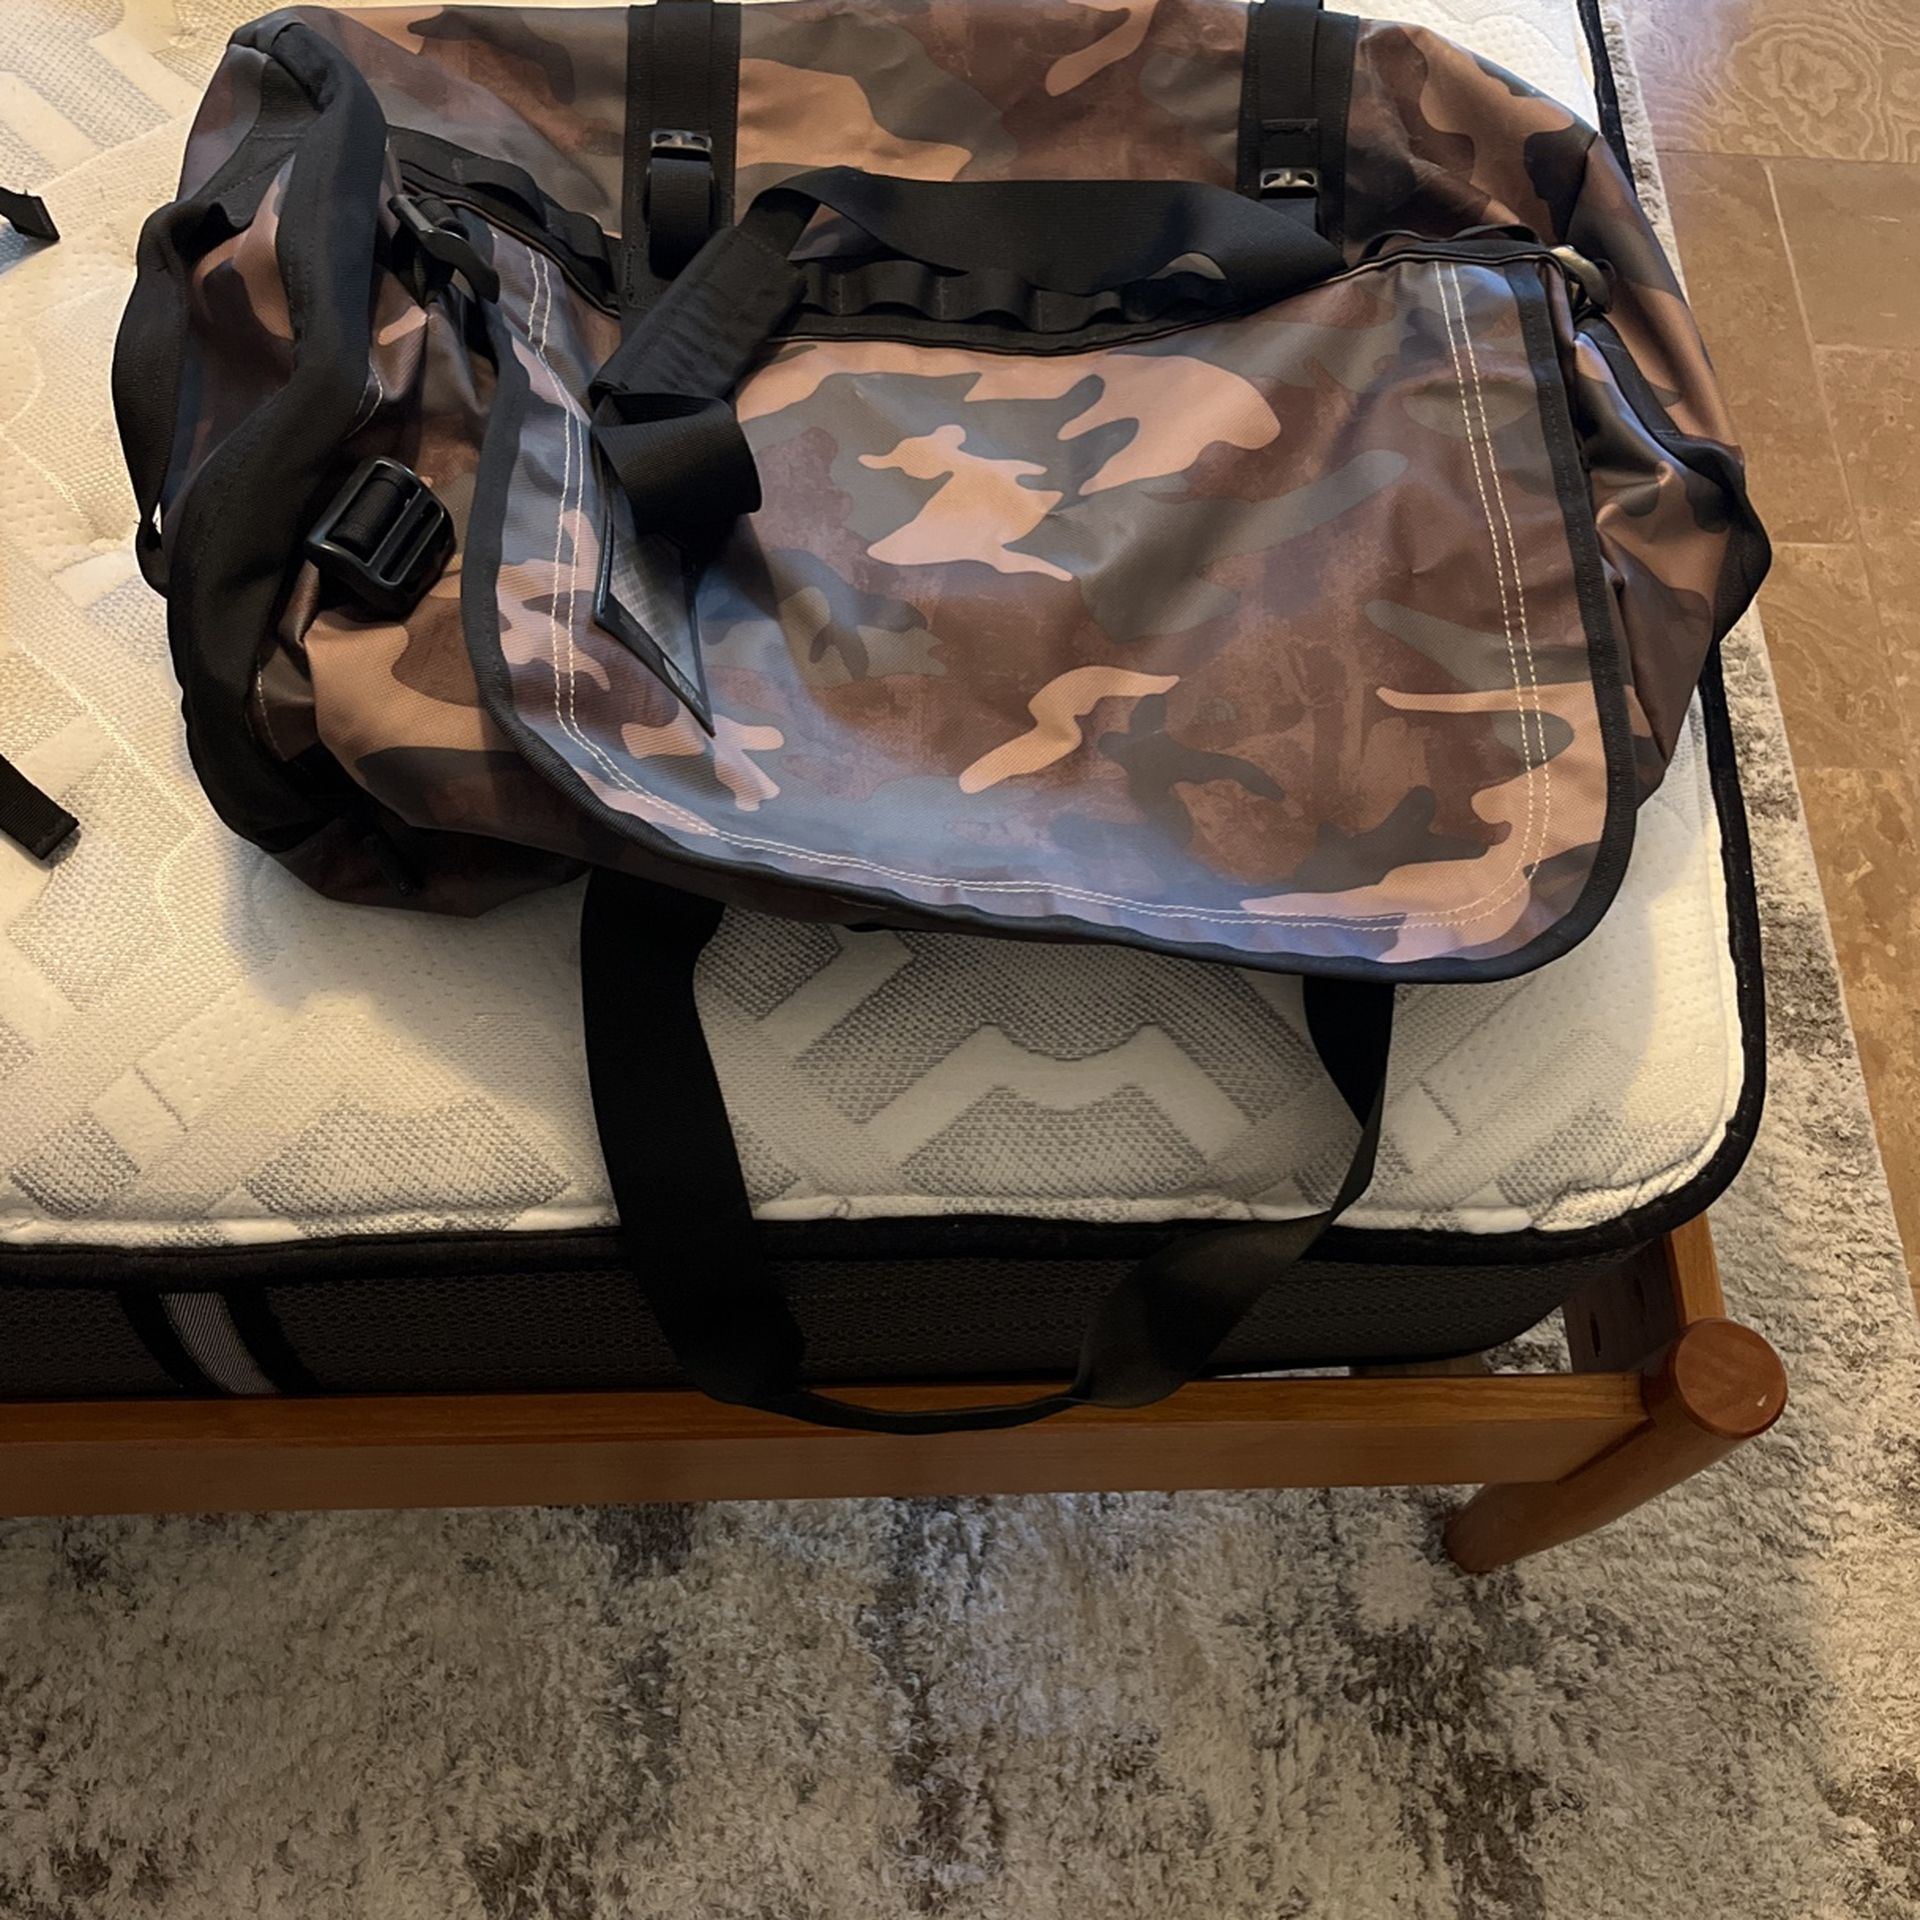 North face Duffle